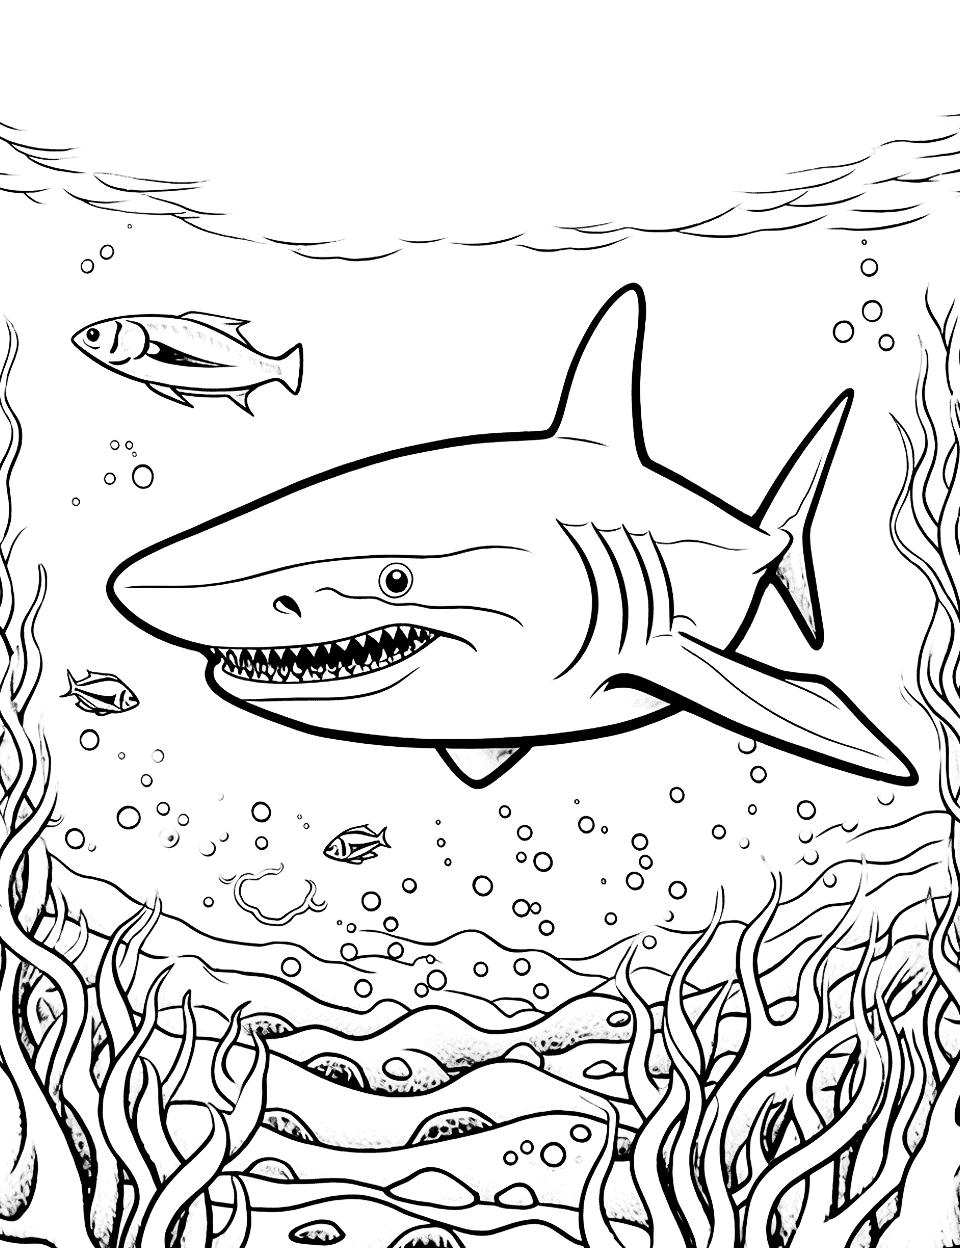 Shark Week Discovery Coloring Page - Sharks uncovering a hidden treasure during shark week.